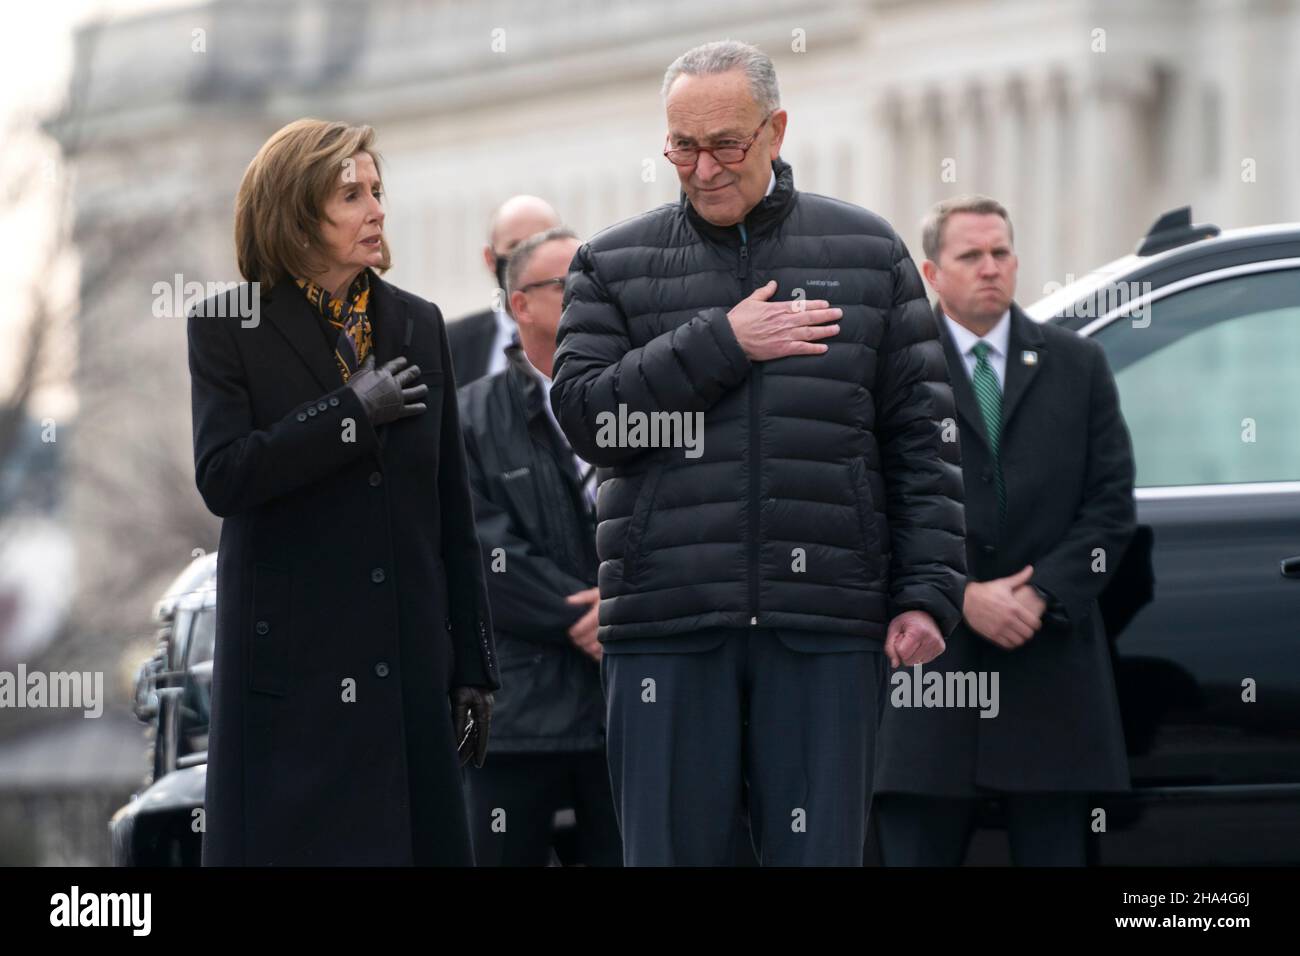 Washington, USA. 10th Dec, 2021. Speaker Nancy Pelosi (D-Calif.) and House Majority Leader Charles Schumer (D-N.Y.) watch a military honor guard carries the casket of Sen. Bob Dole (R-Kan.) after lying in state at the U.S. Capitol in Washington, DC, on Friday, December 10, 2021. Dole will be taken to Washington National Cathedral for a funeral service. (Photo by Greg Nash/Pool/Sipa USA) Credit: Sipa USA/Alamy Live News Stock Photo